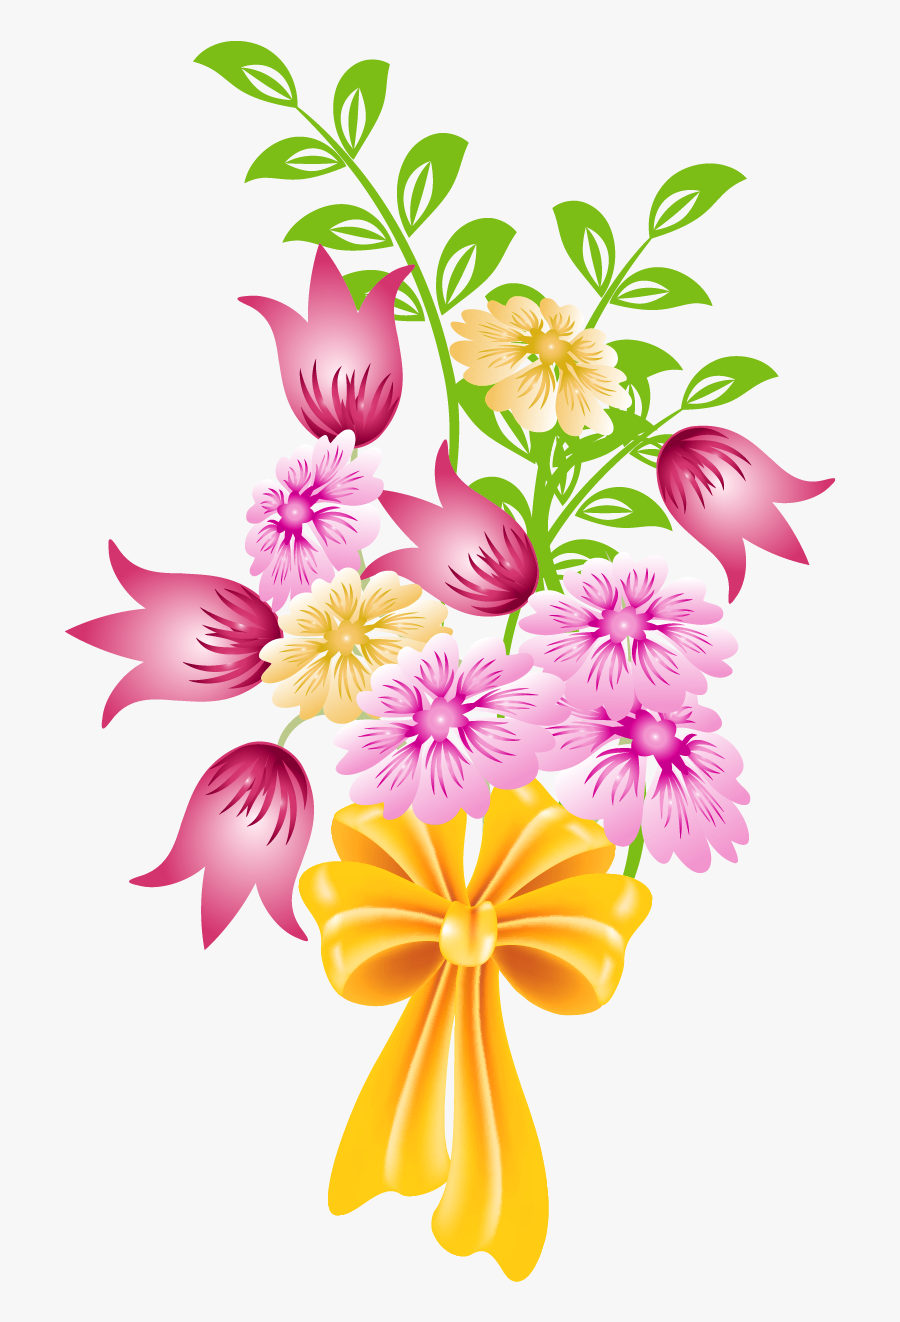 Spring Flower Bouquet Clip Art Background 1 Hd Wallpapers - Flowers Images Png Hd, Transparent Clipart